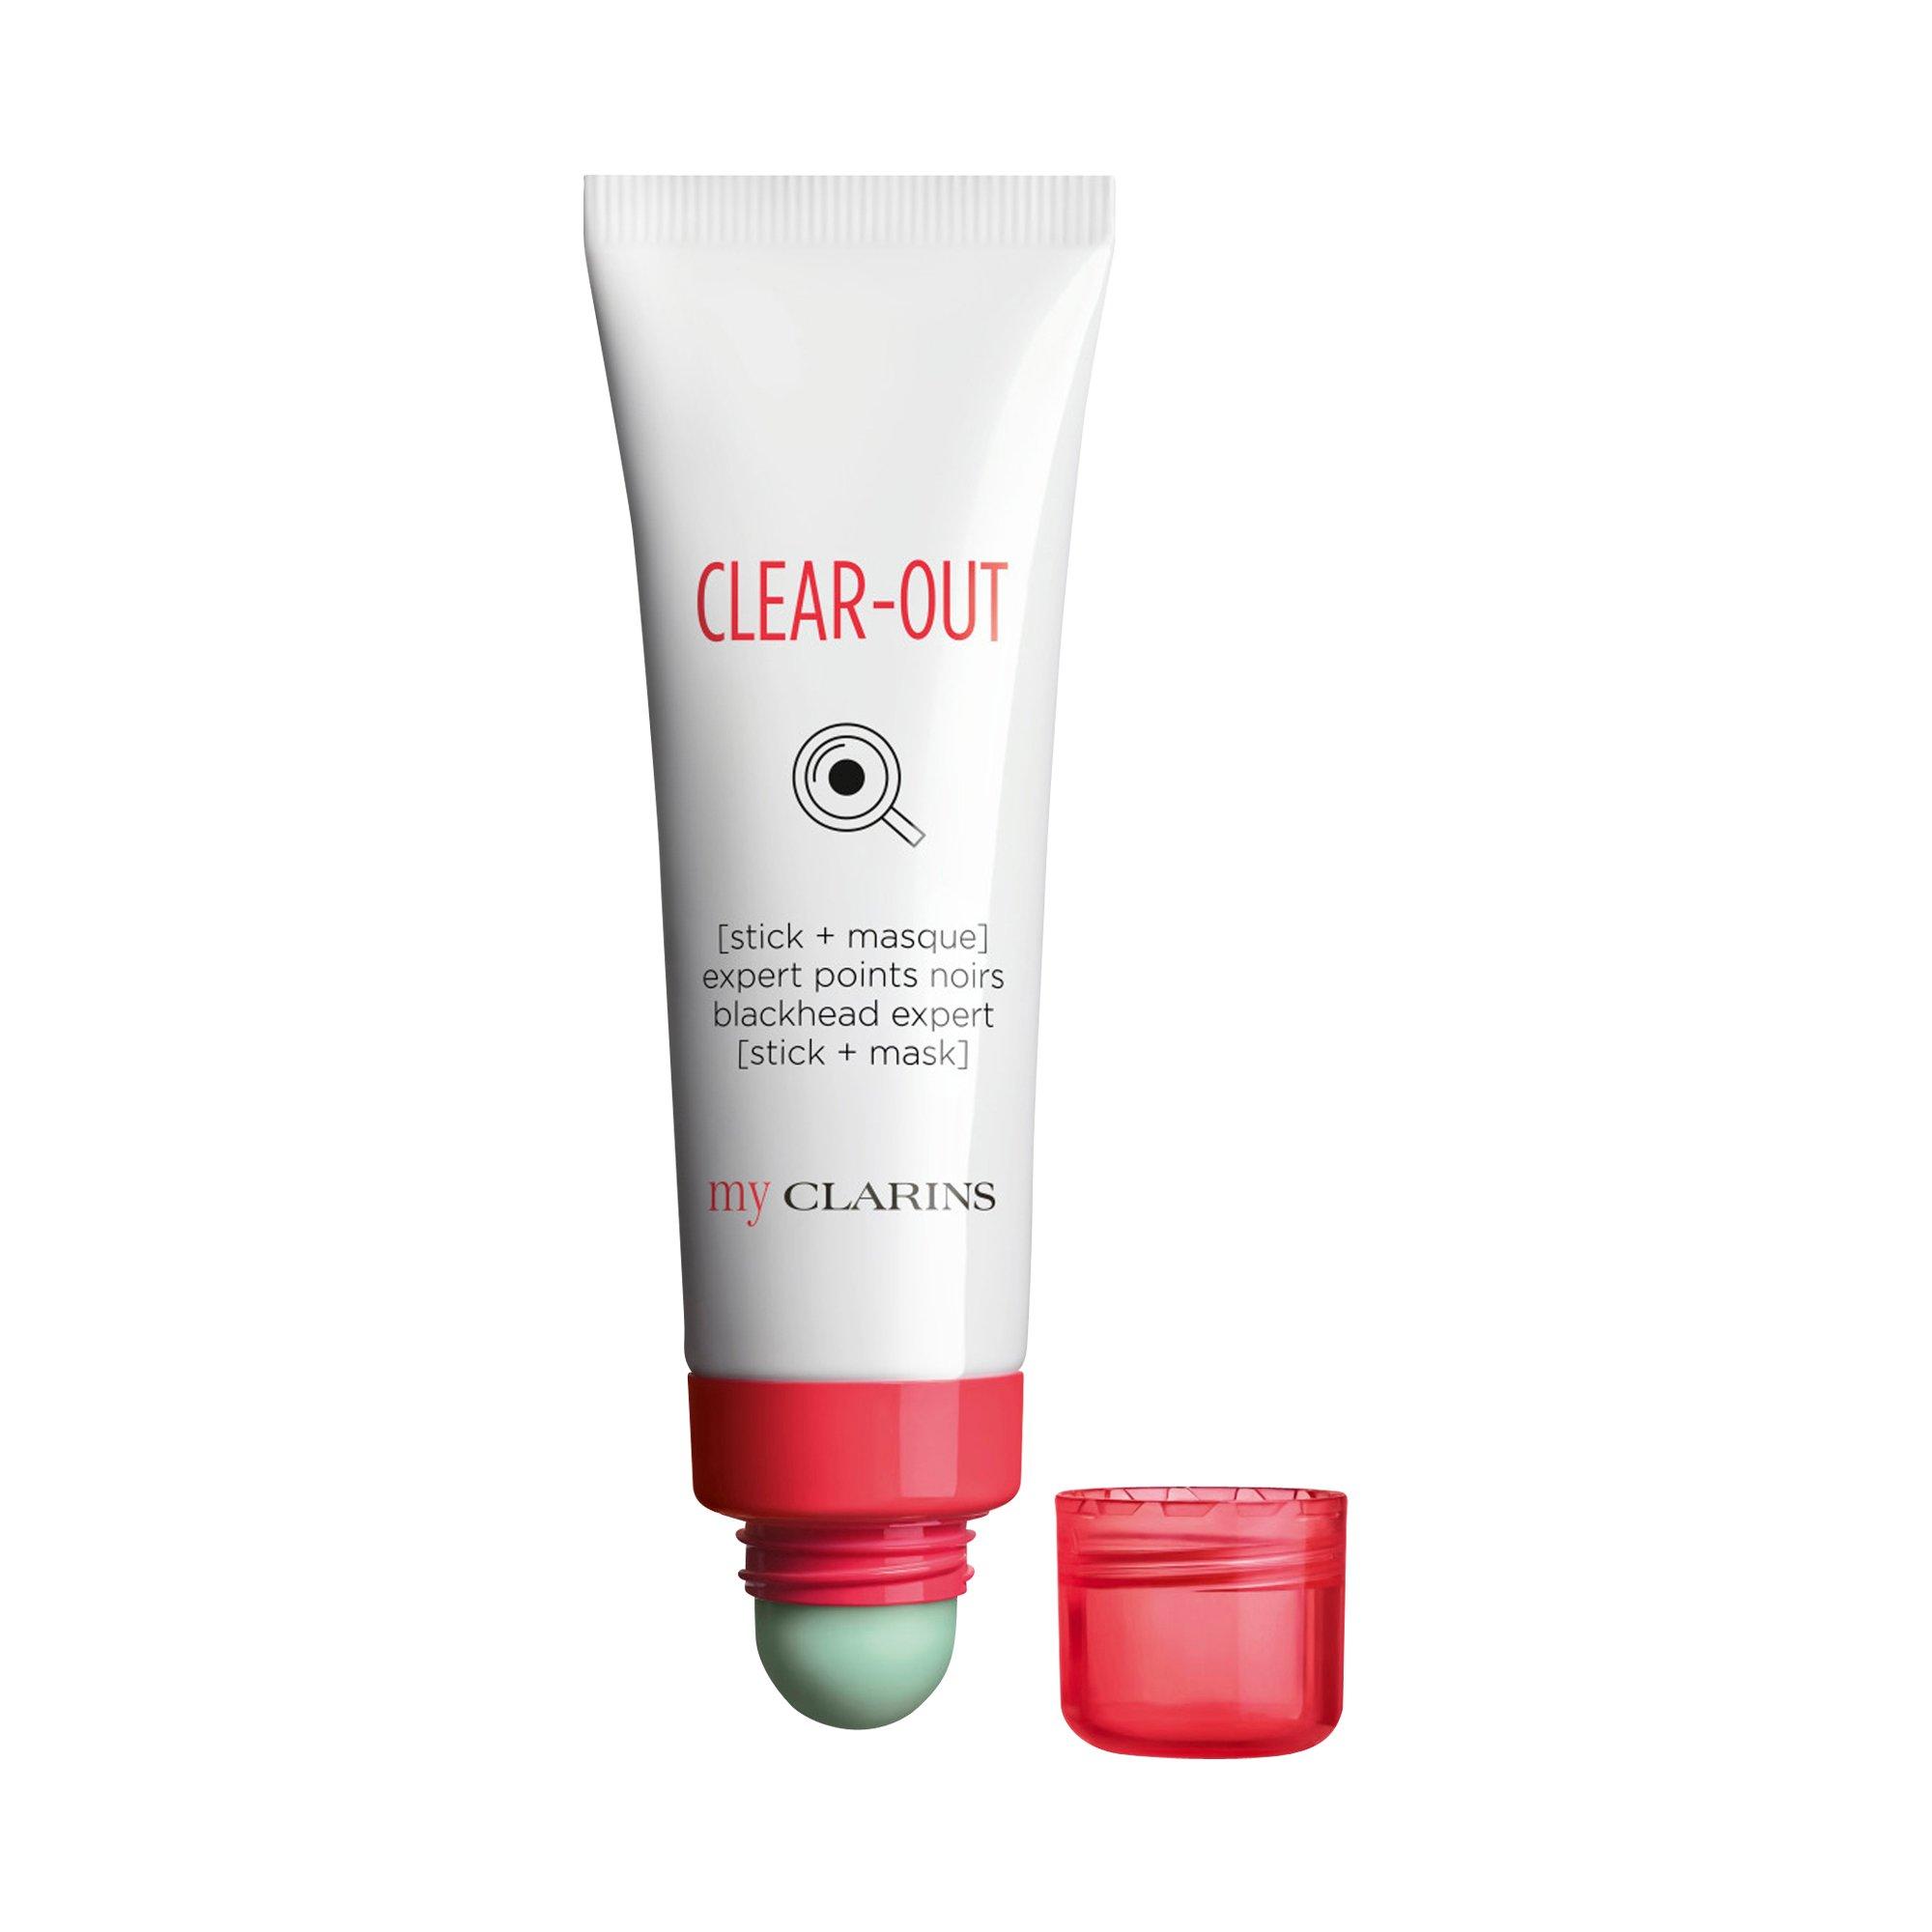 Image of my CLARINS Clear-Out Anti-Blackheads Stick and Mask - 50ml